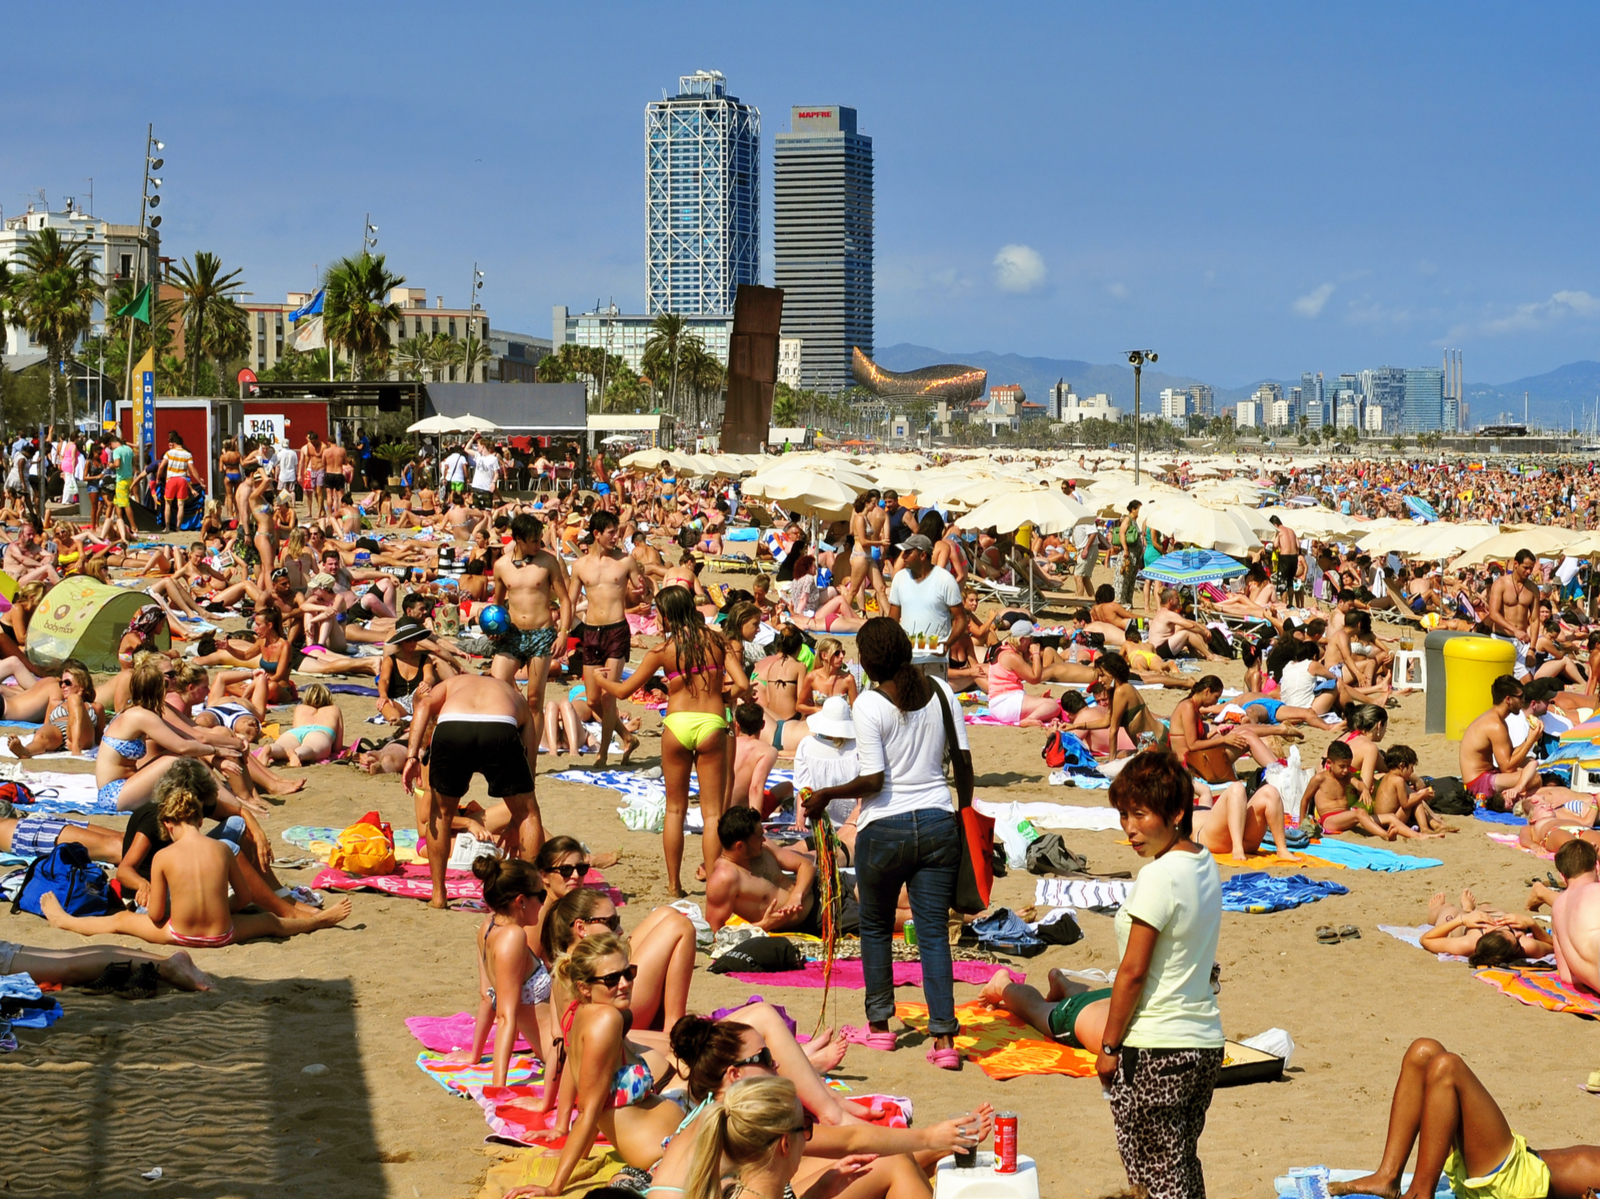 Super busy beach in La Barcoloneta during the worst time to visit Barcelona